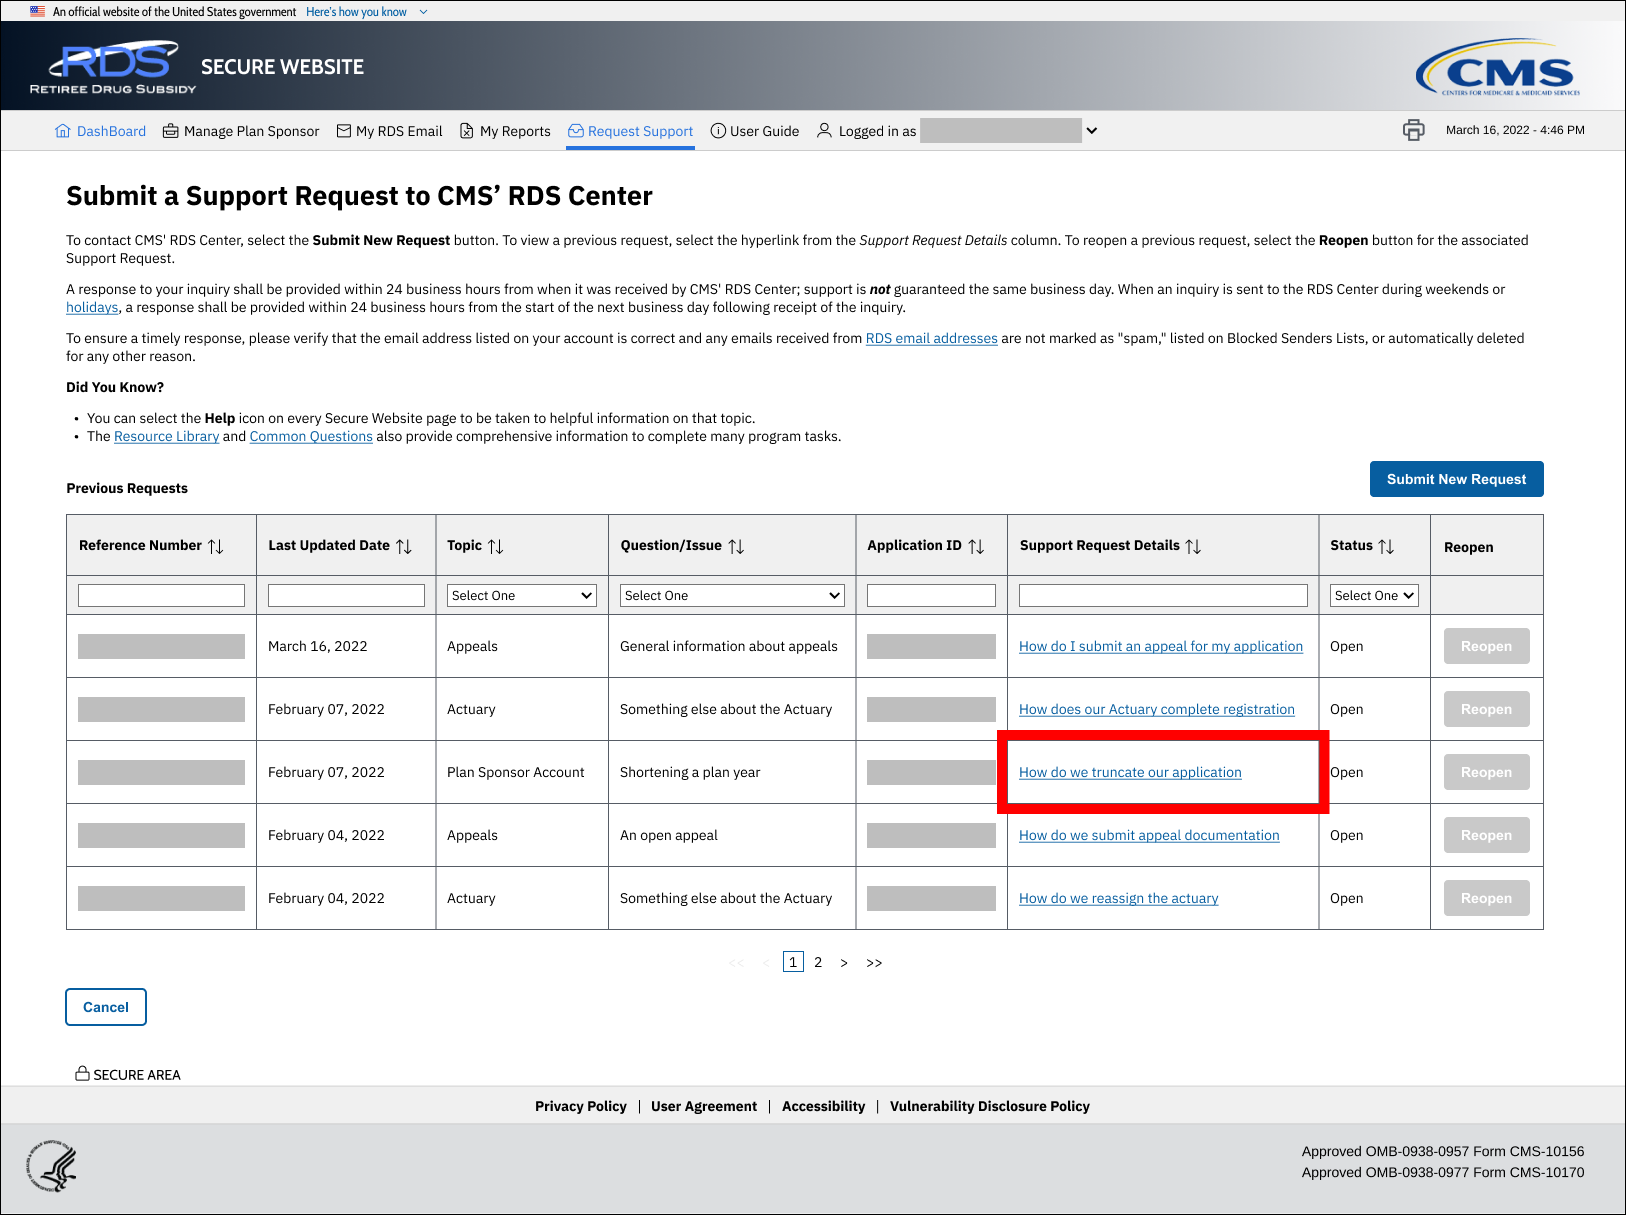 Submit a Support Request to CMS' RDS Center page with sample data. Support Request Details link is highlighted.